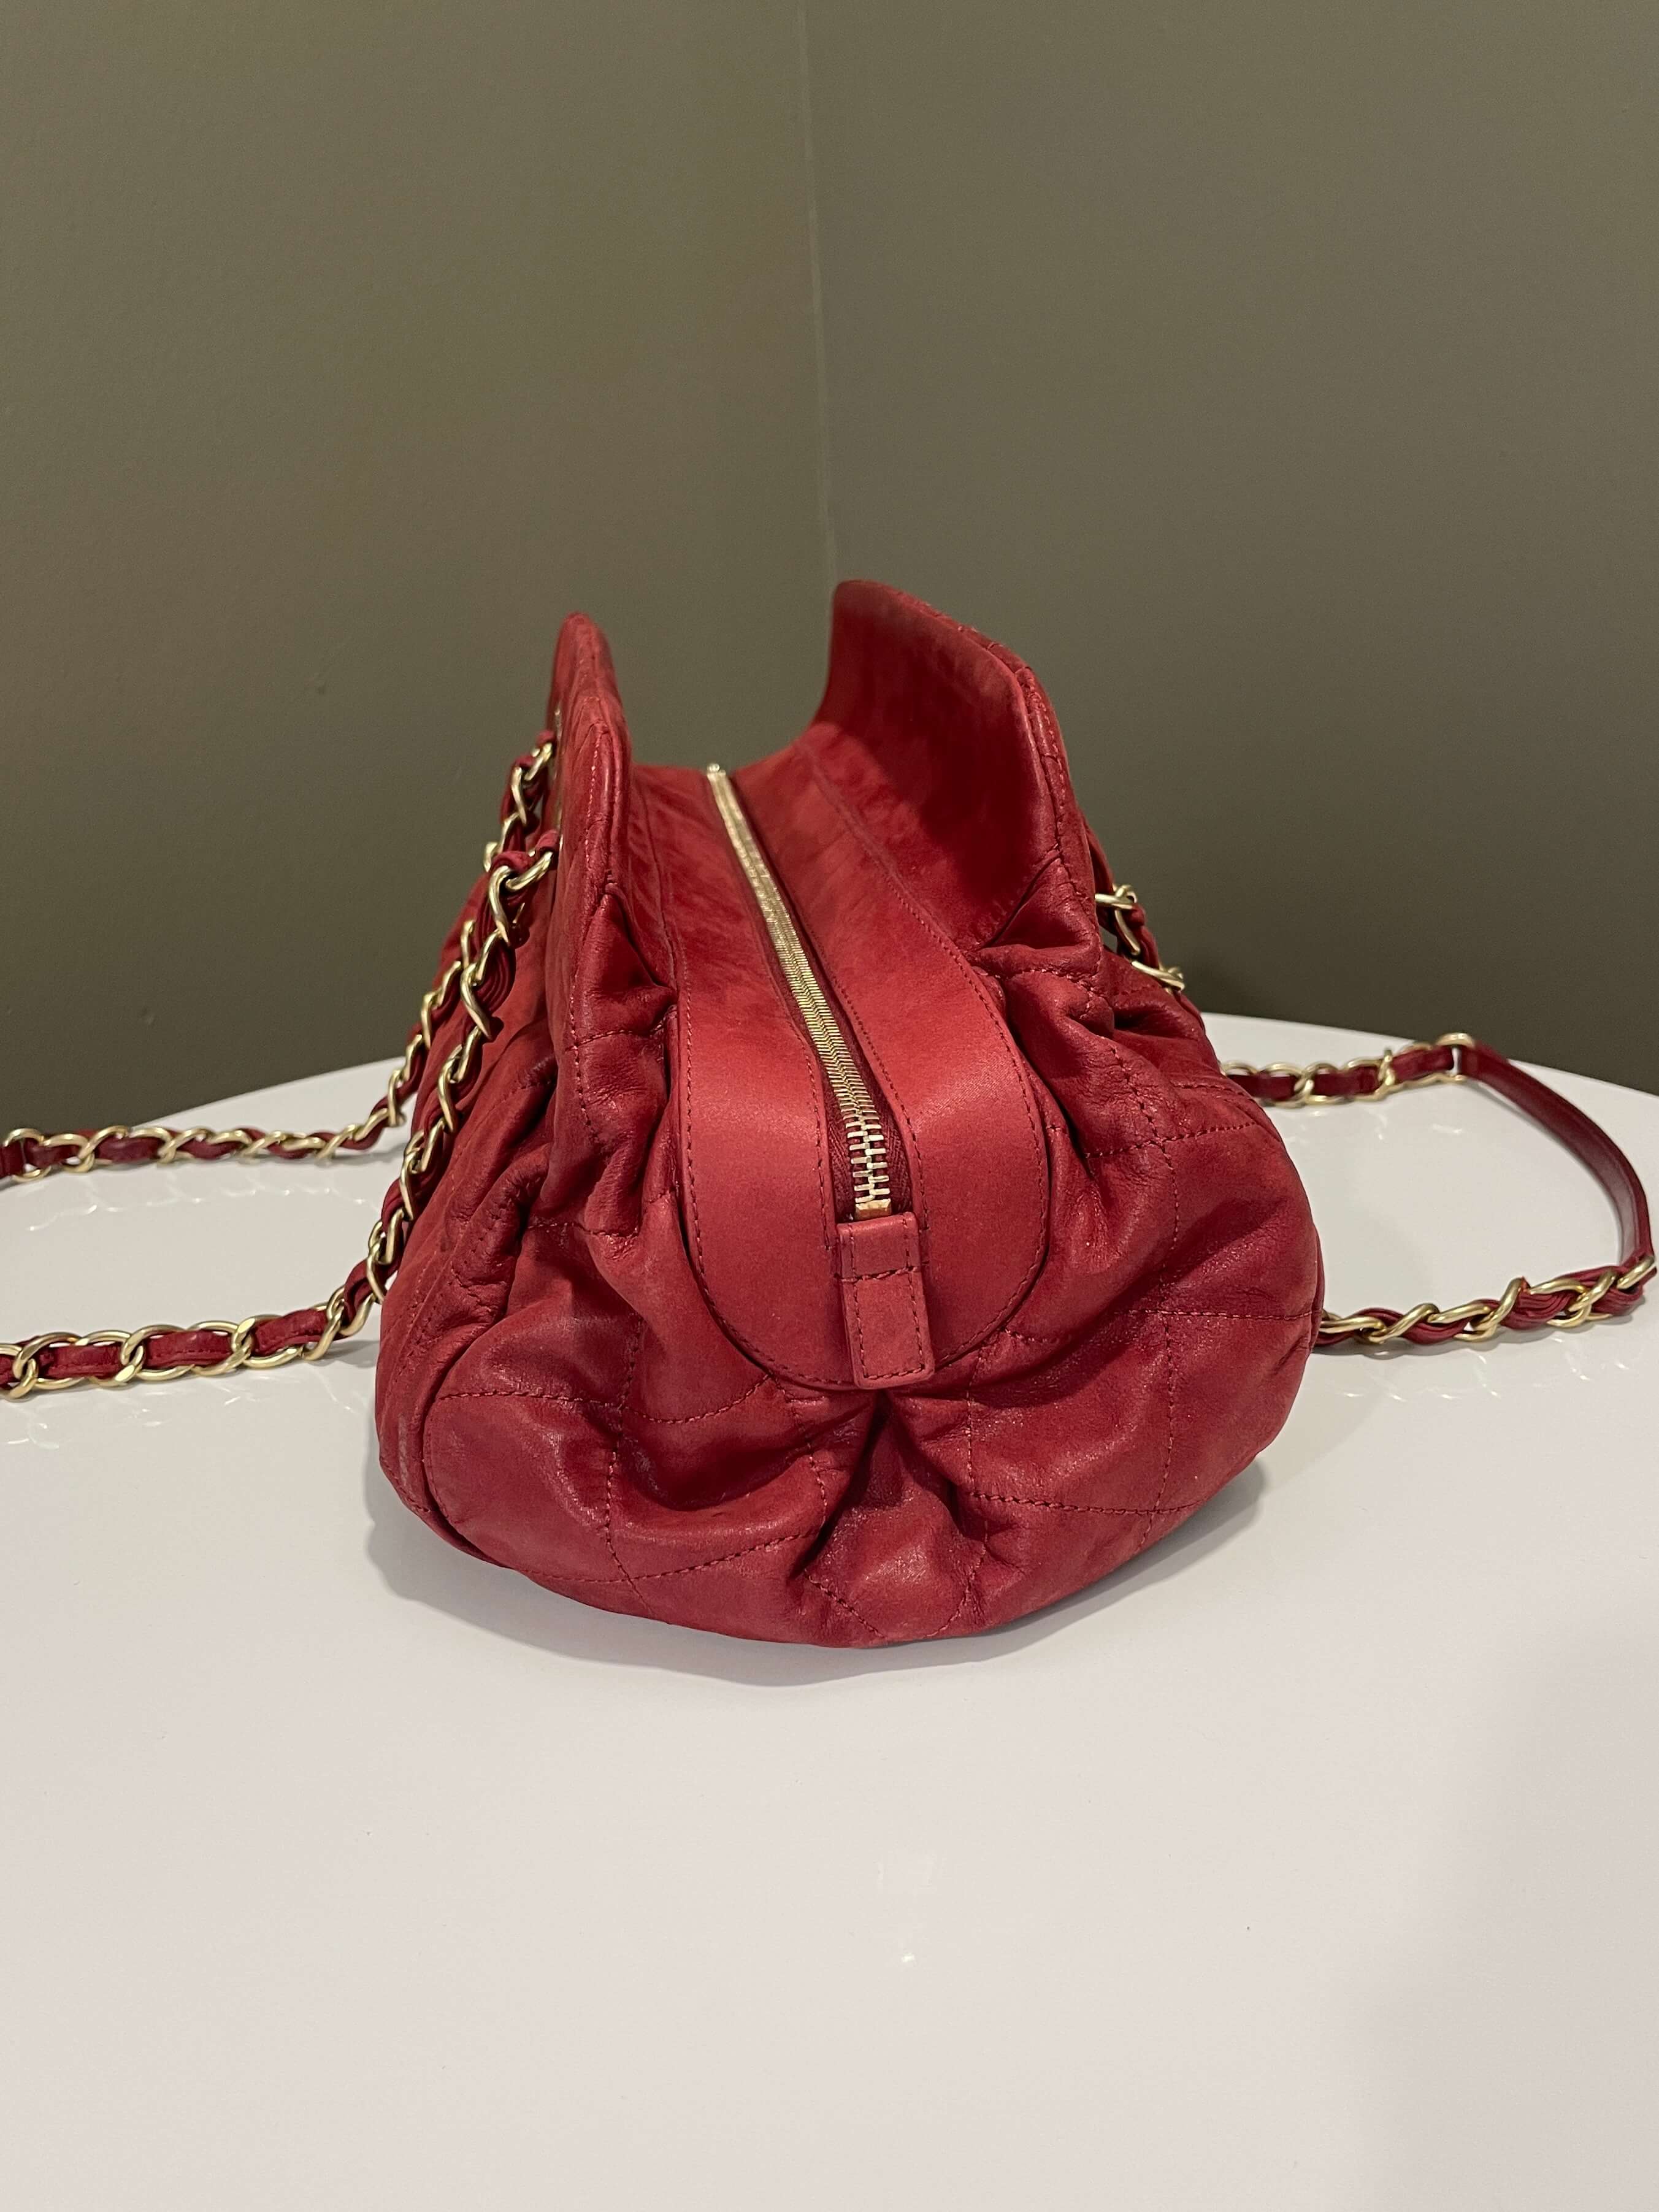 Chanel Cc Quilted Chain Shoulder Bag Red Calfskin